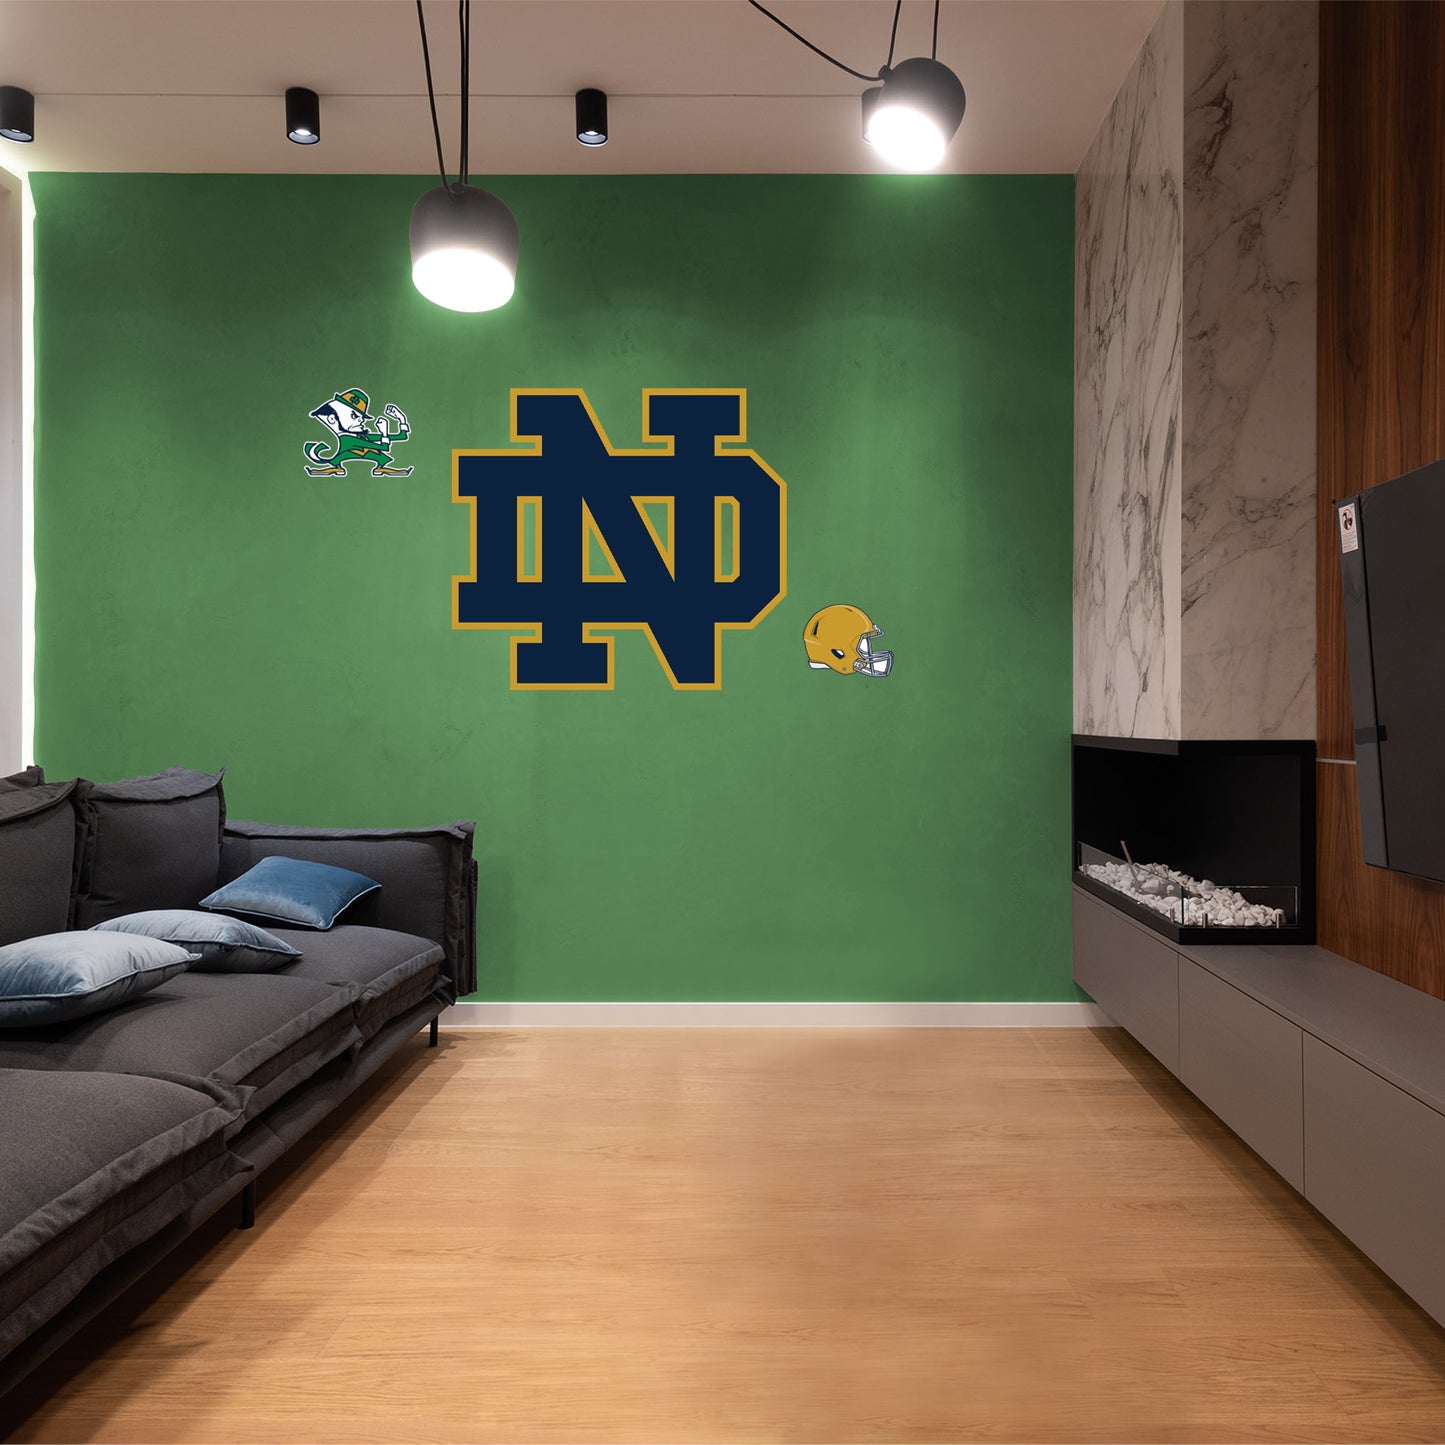 Notre Dame Fighting Irish: ND Logo - Officially Licensed NCAA Removable Adhesive Decal